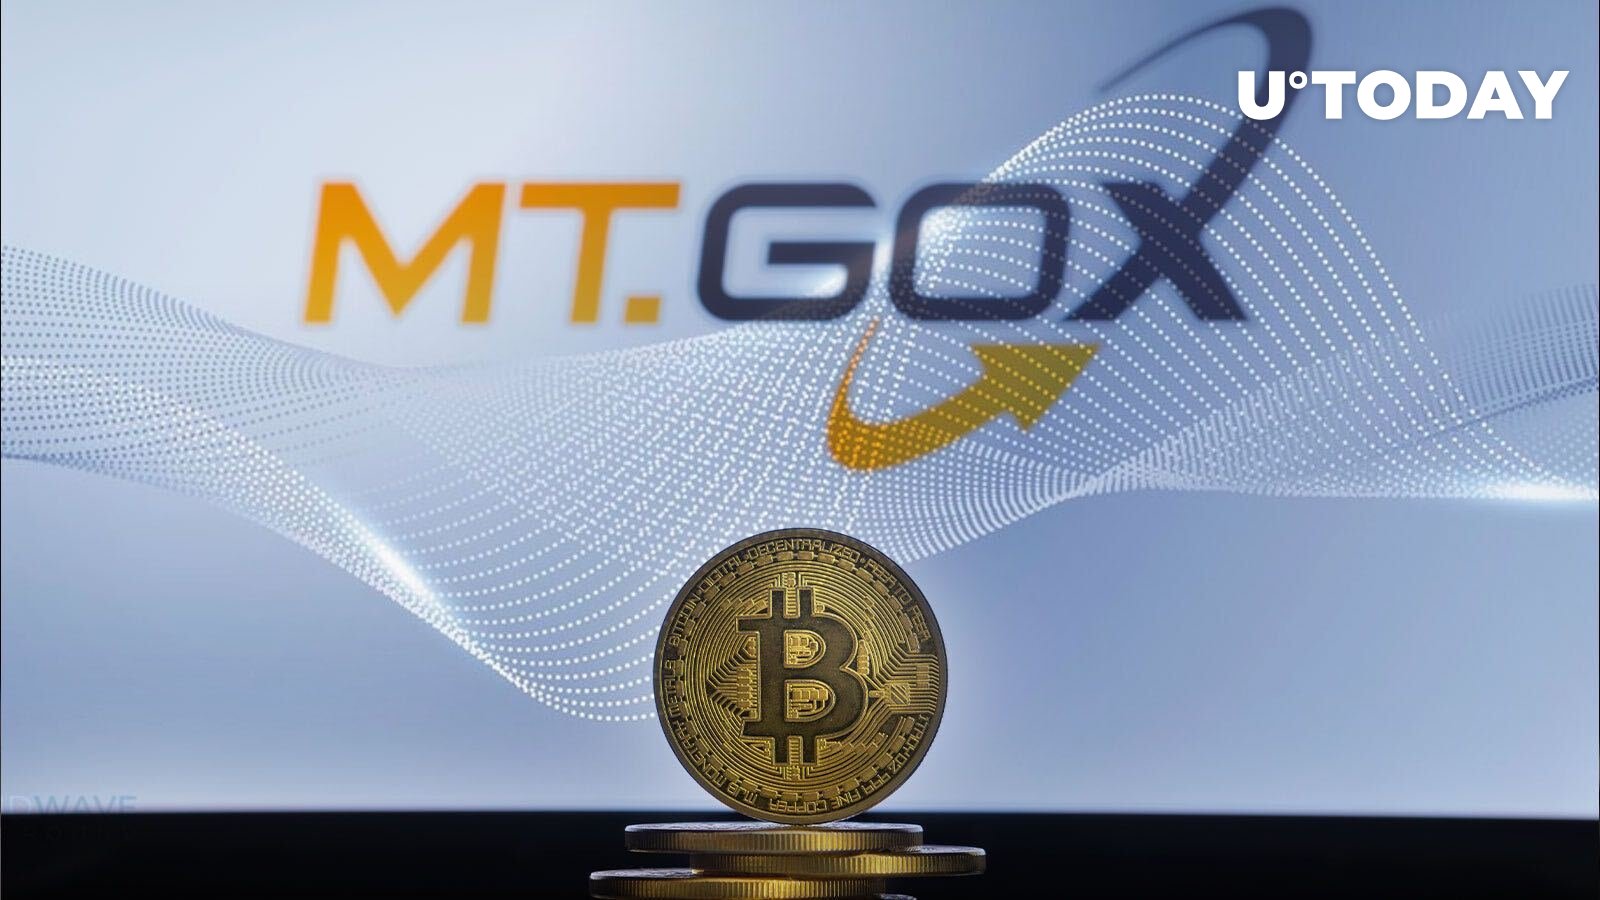 Mt. Gox Creditor Denies Fake Report About Imminent Release of 140,000 BTC